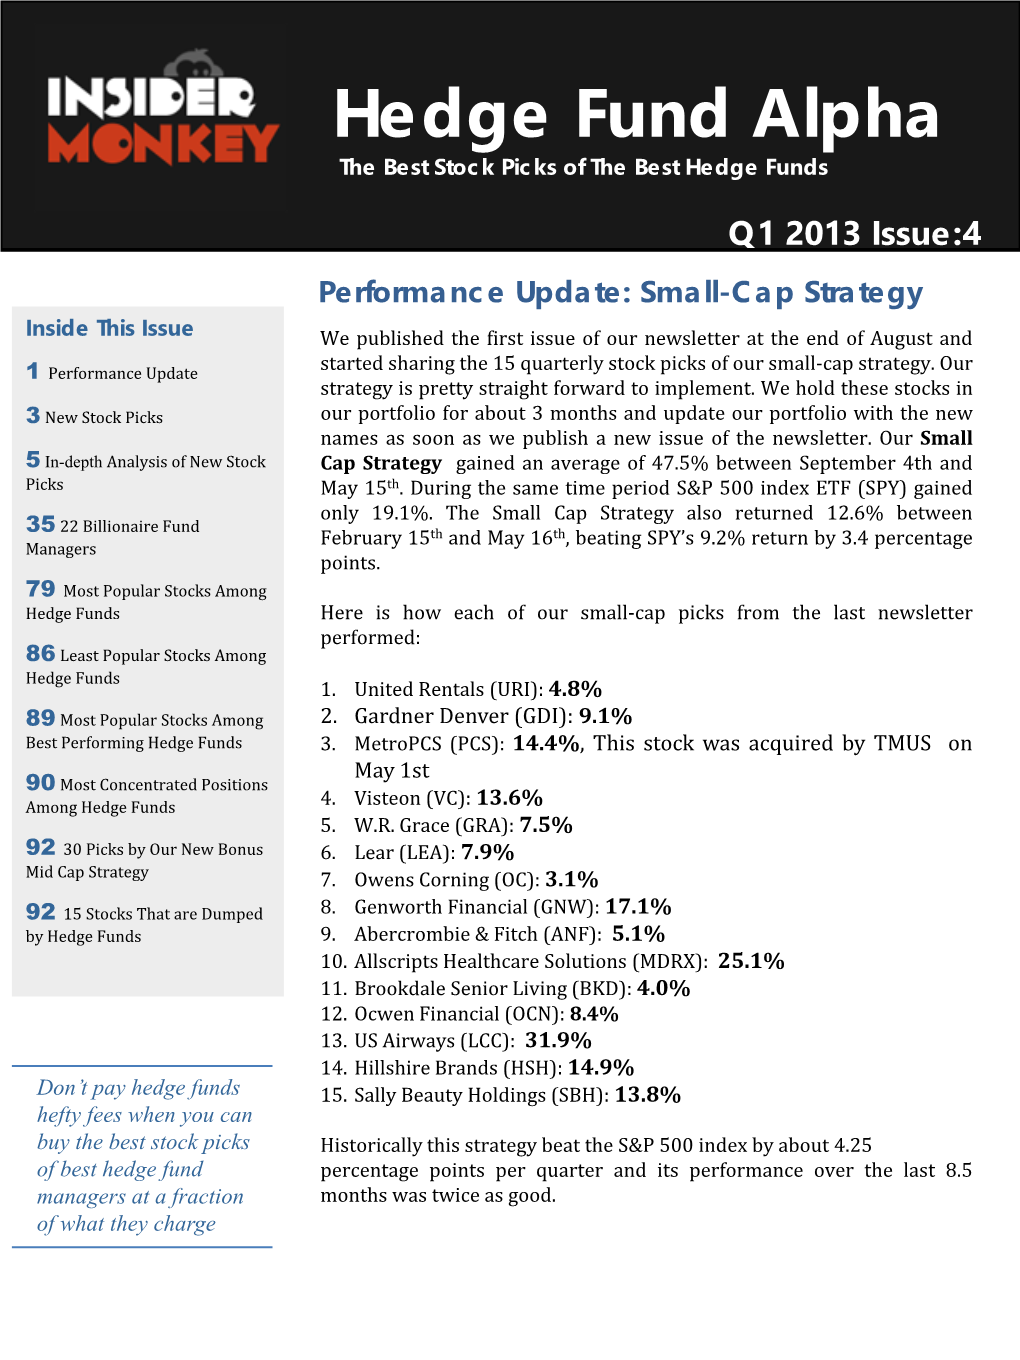 Hedge Fund Alpha the Best Stock Picks of the Best Hedge Funds